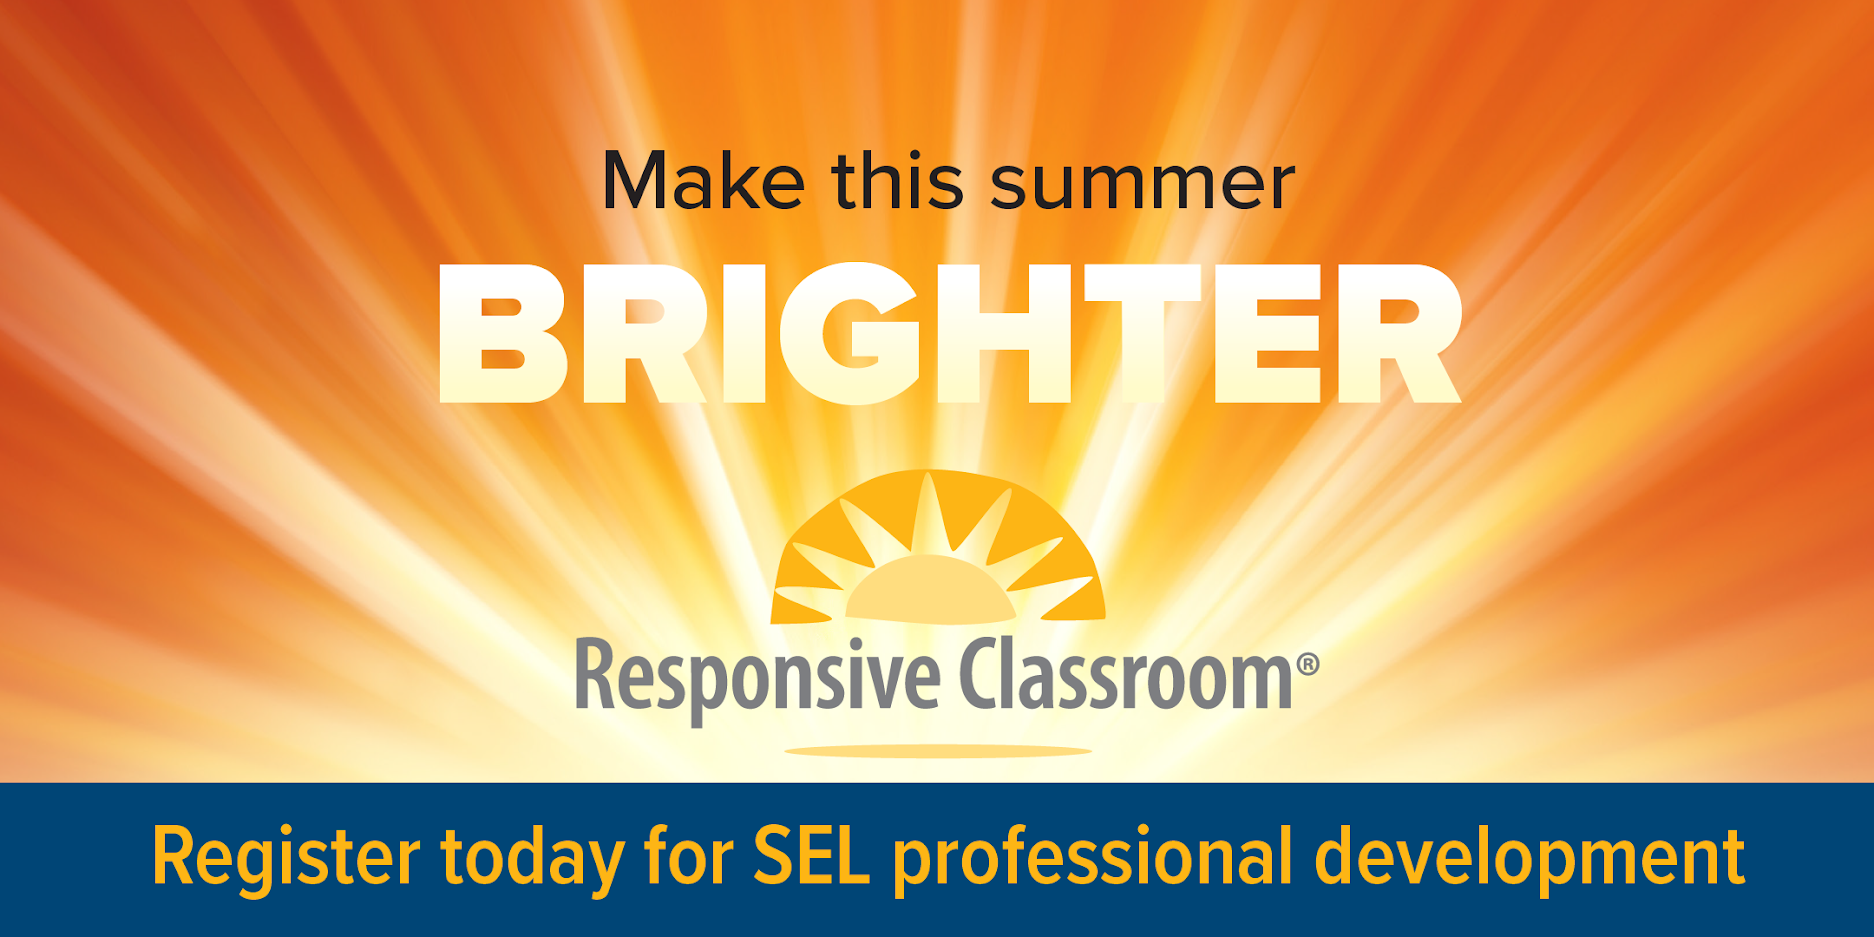 Image for event Responsive Classroom Institutes! August 9 to August 12 – Minneapolis, MN